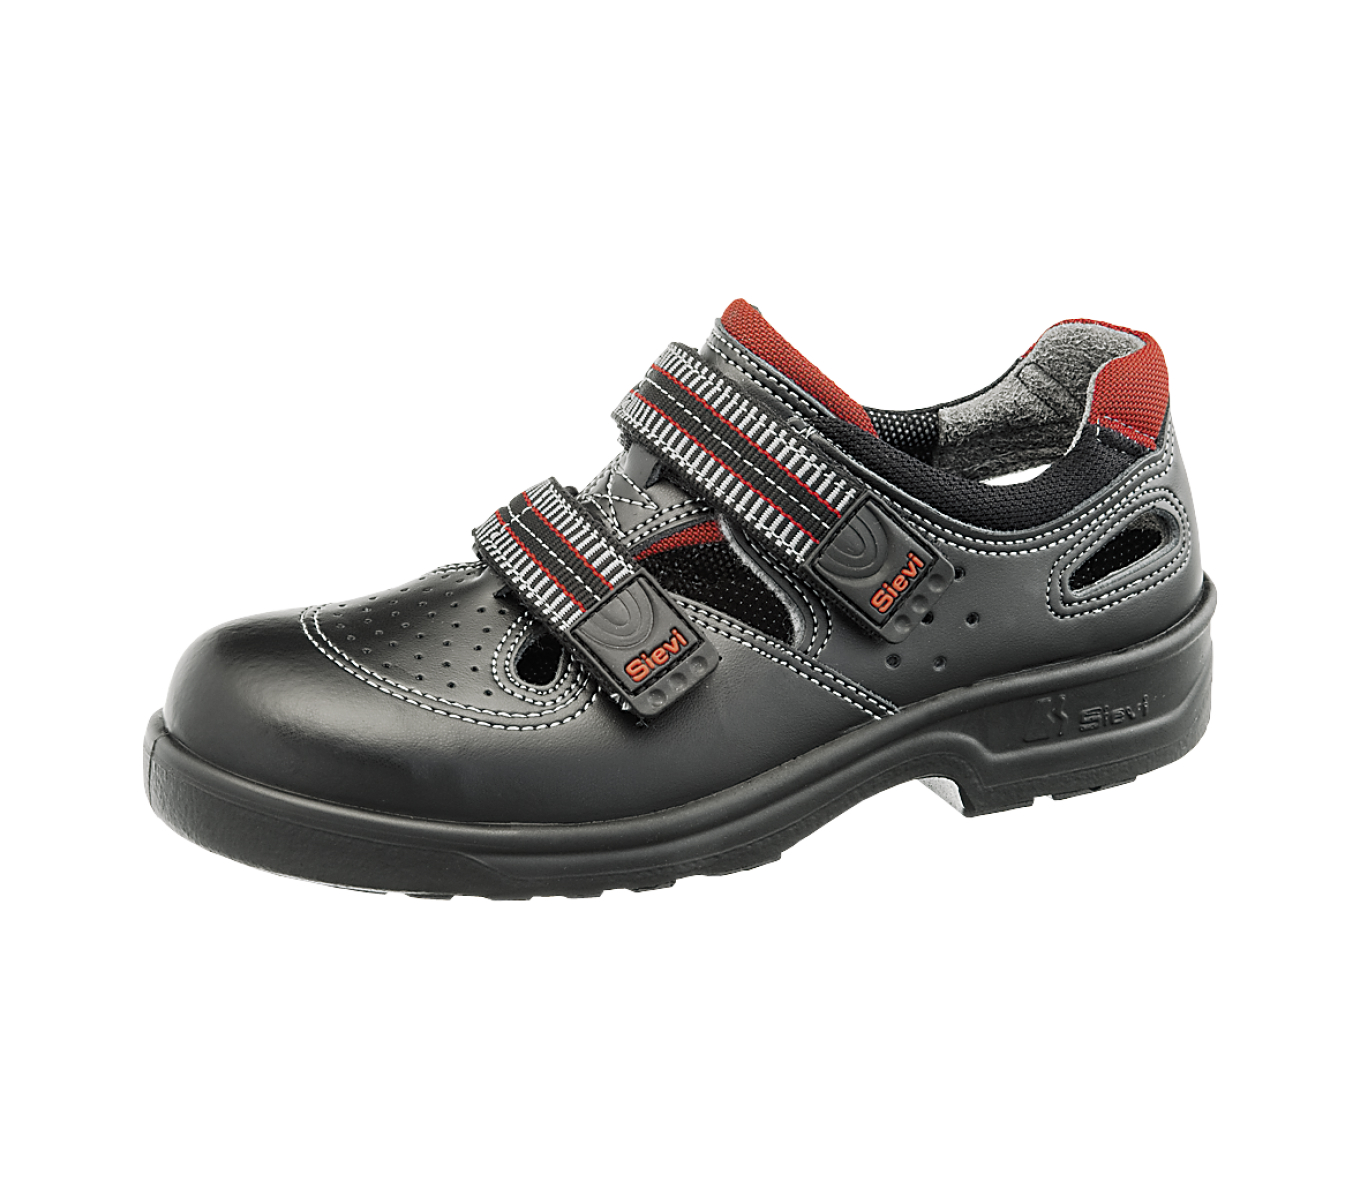 Sievi Relax S1 ESD Safety Shoes with 